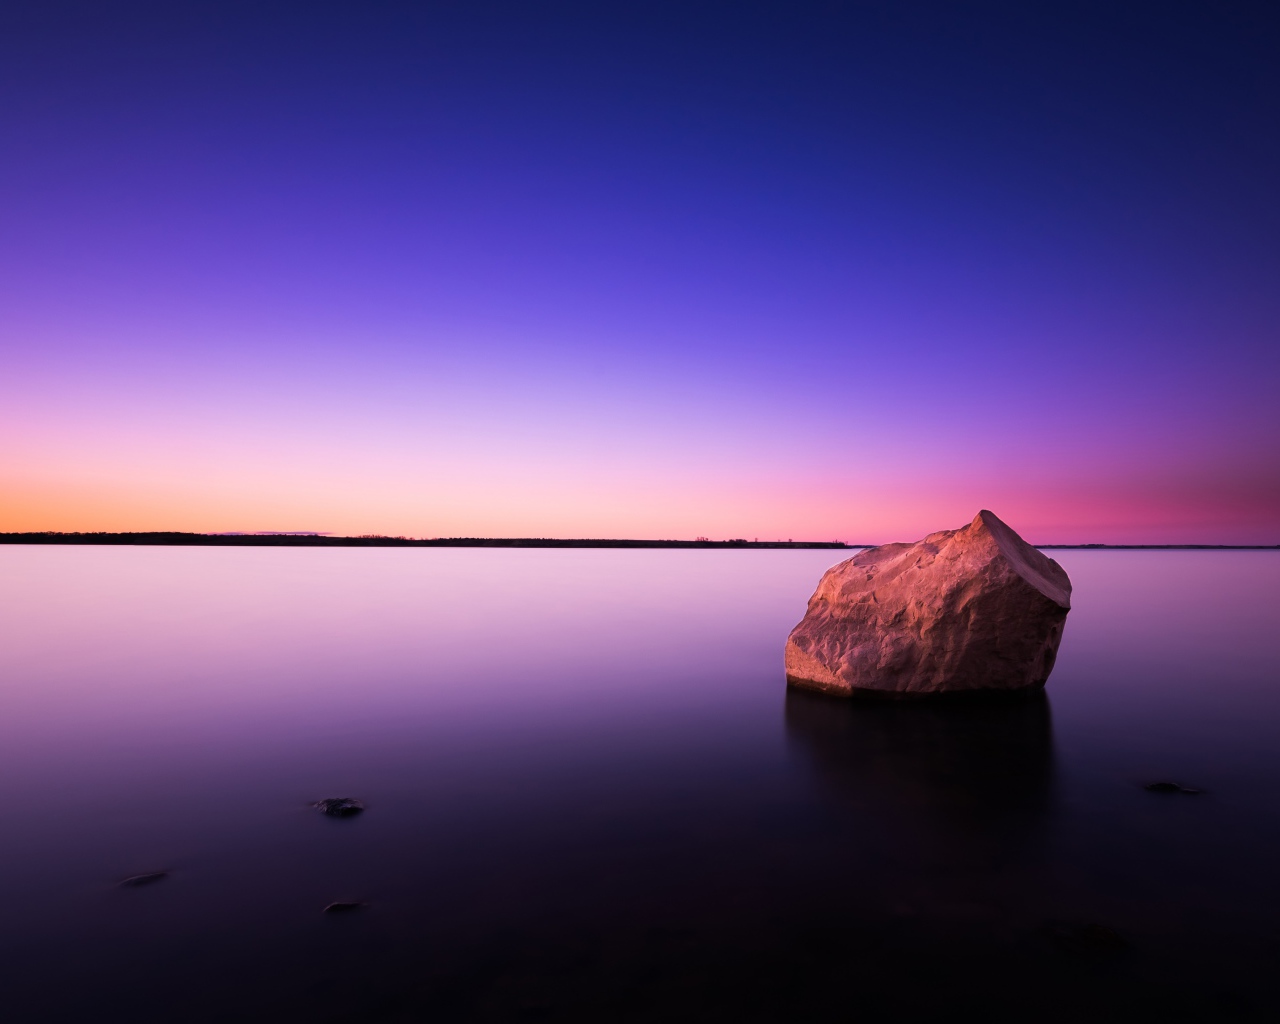 Big stone in calm water at dusk